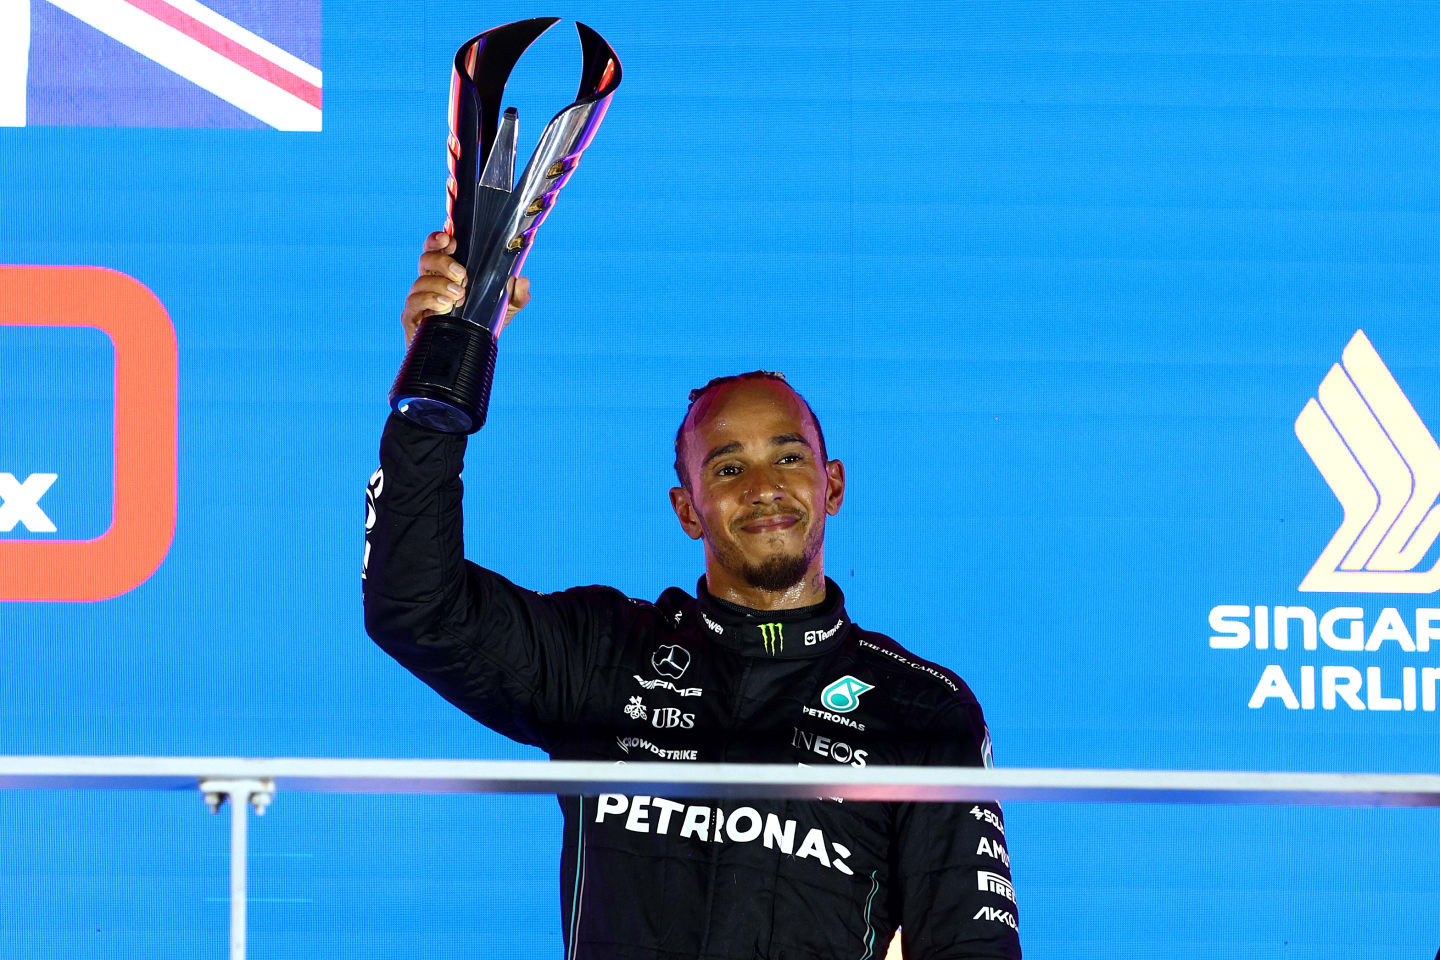 SINGAPORE, SINGAPORE - SEPTEMBER 17: Third placed Lewis Hamilton of Great Britain and Mercedes celebrates on the podium during the F1 Grand Prix of Singapore at Marina Bay Street Circuit on September 17, 2023 in Singapore, Singapore. (Photo by Clive Rose/Getty Images)